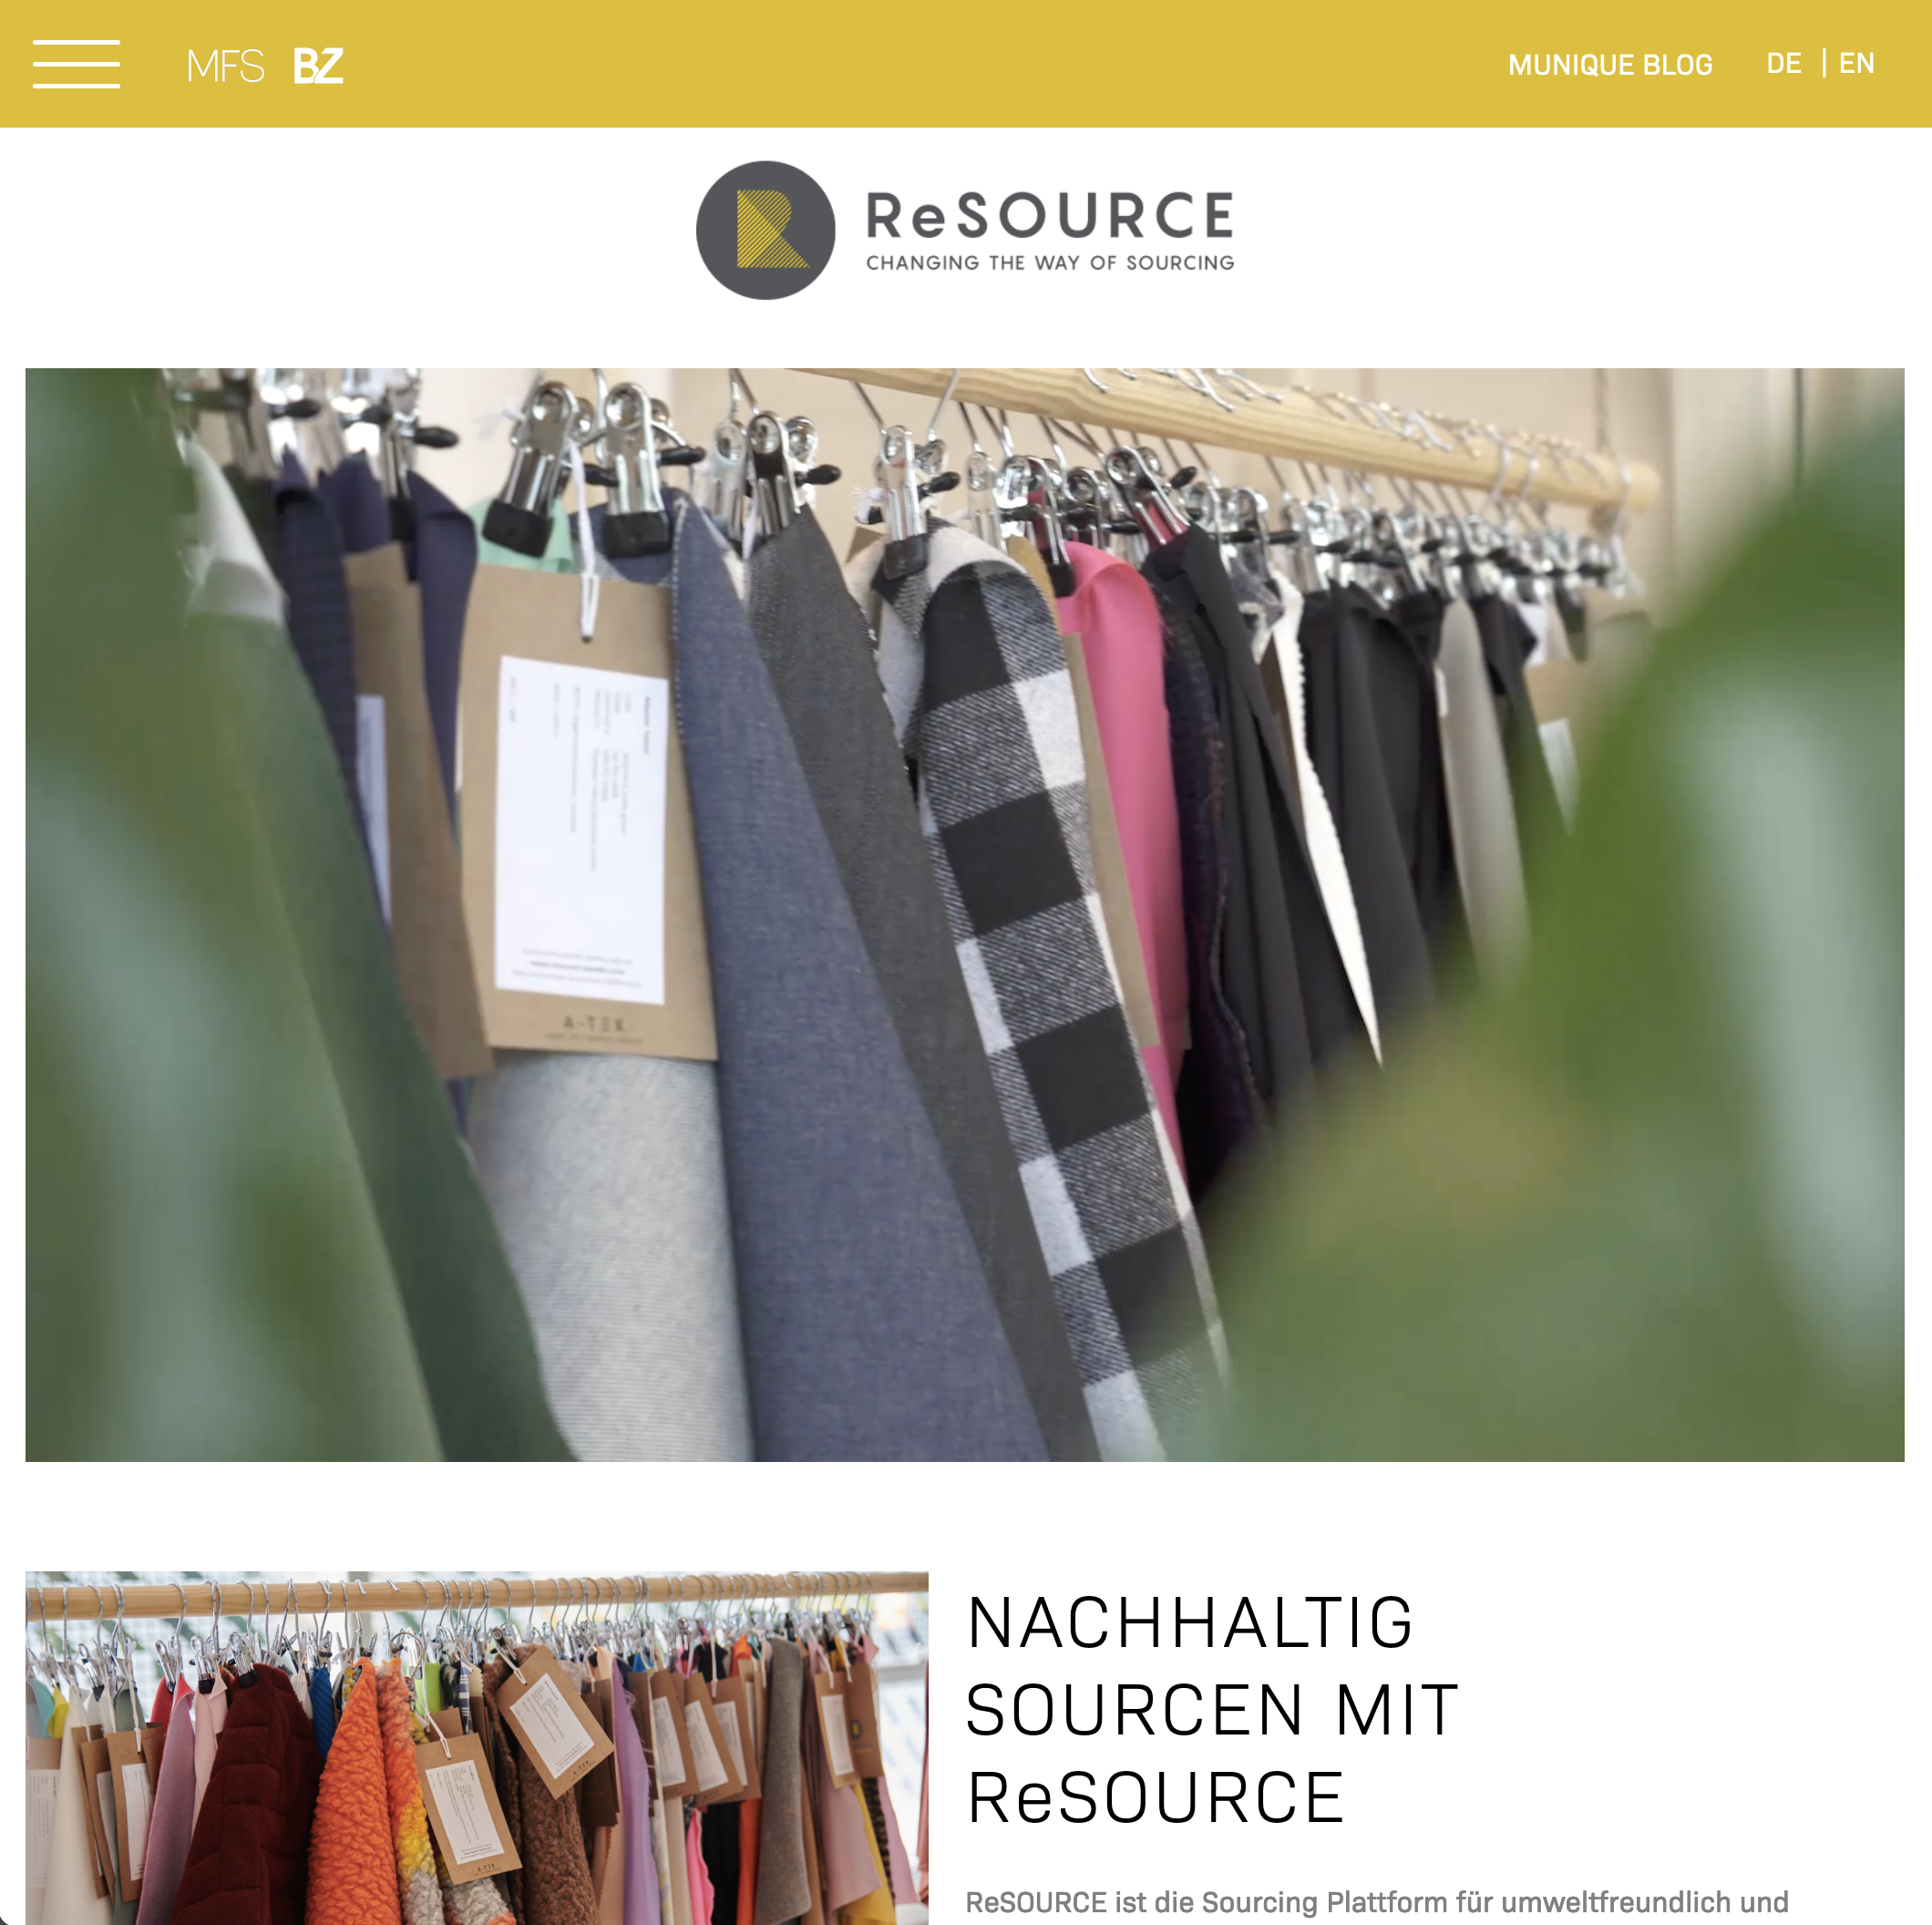 LAUNCH OF THE NEW ReSOURCE ONLINE SOURCING PLATFORM